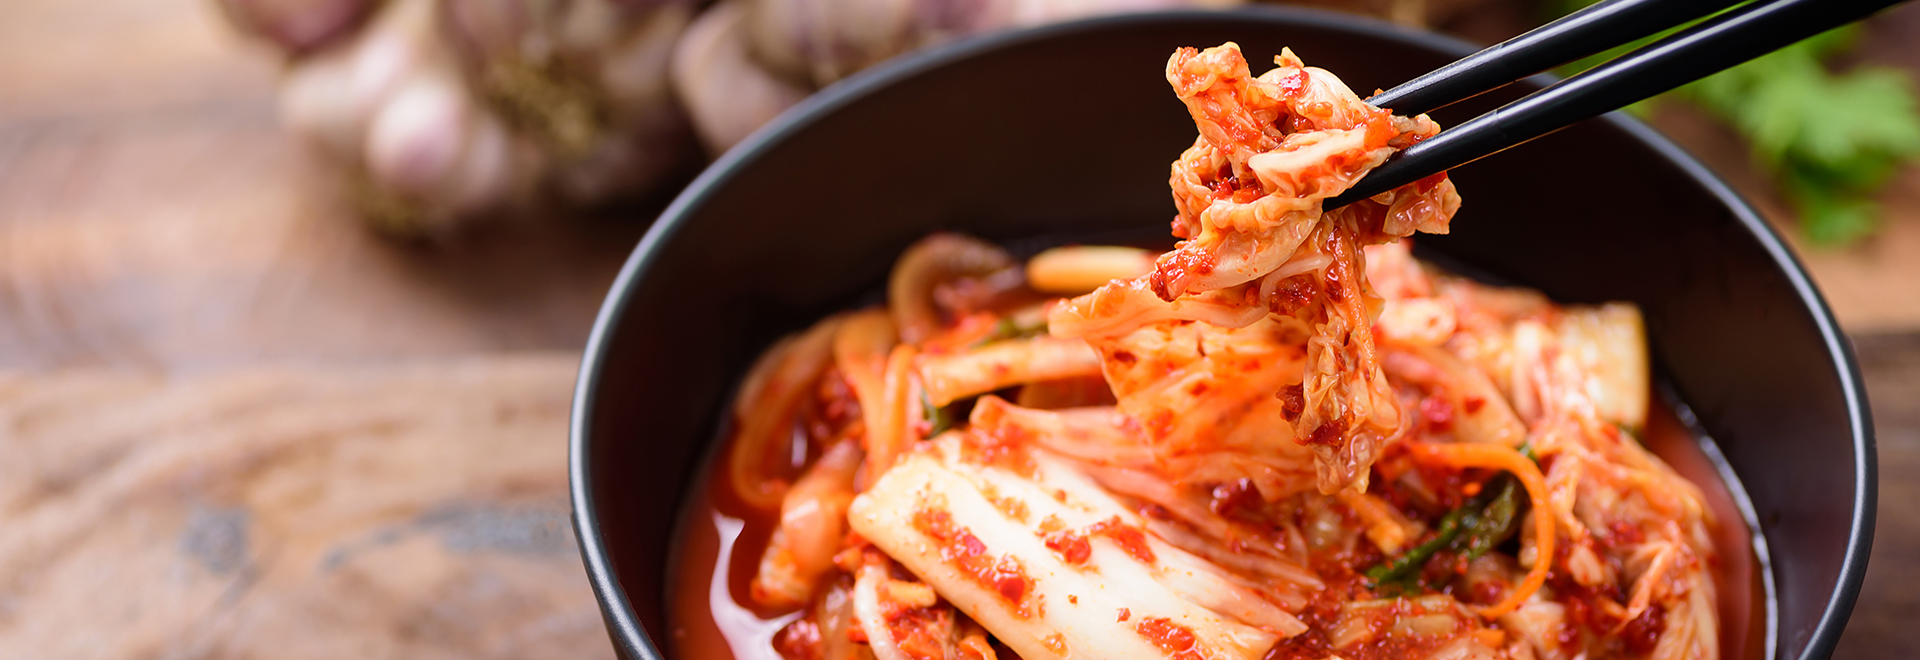 benefits-and-things-to-know-about-kimchi